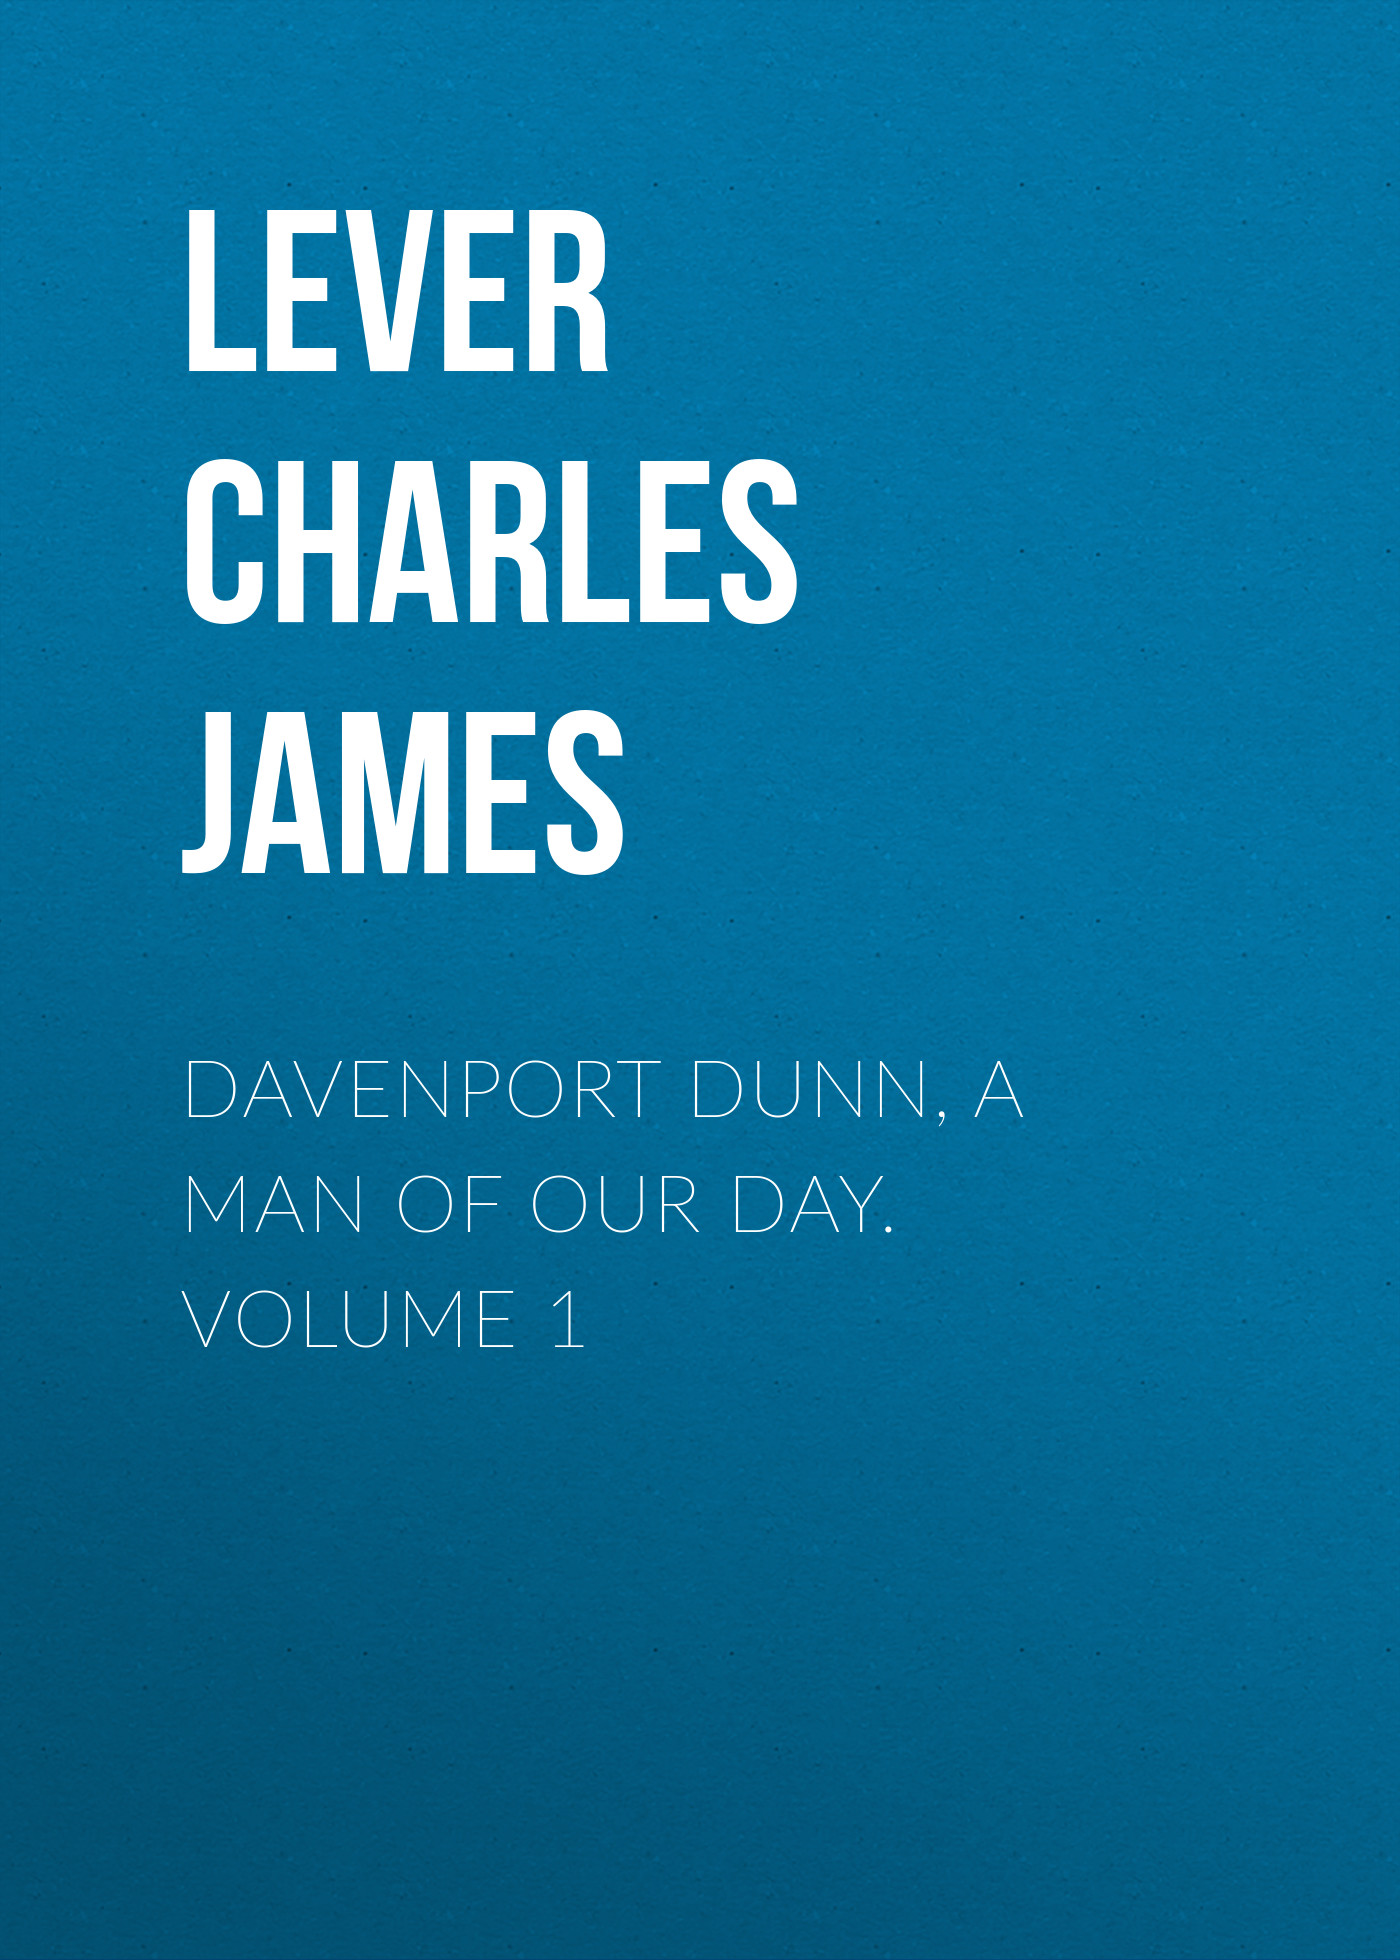 Davenport Dunn, a Man of Our Day. Volume 1